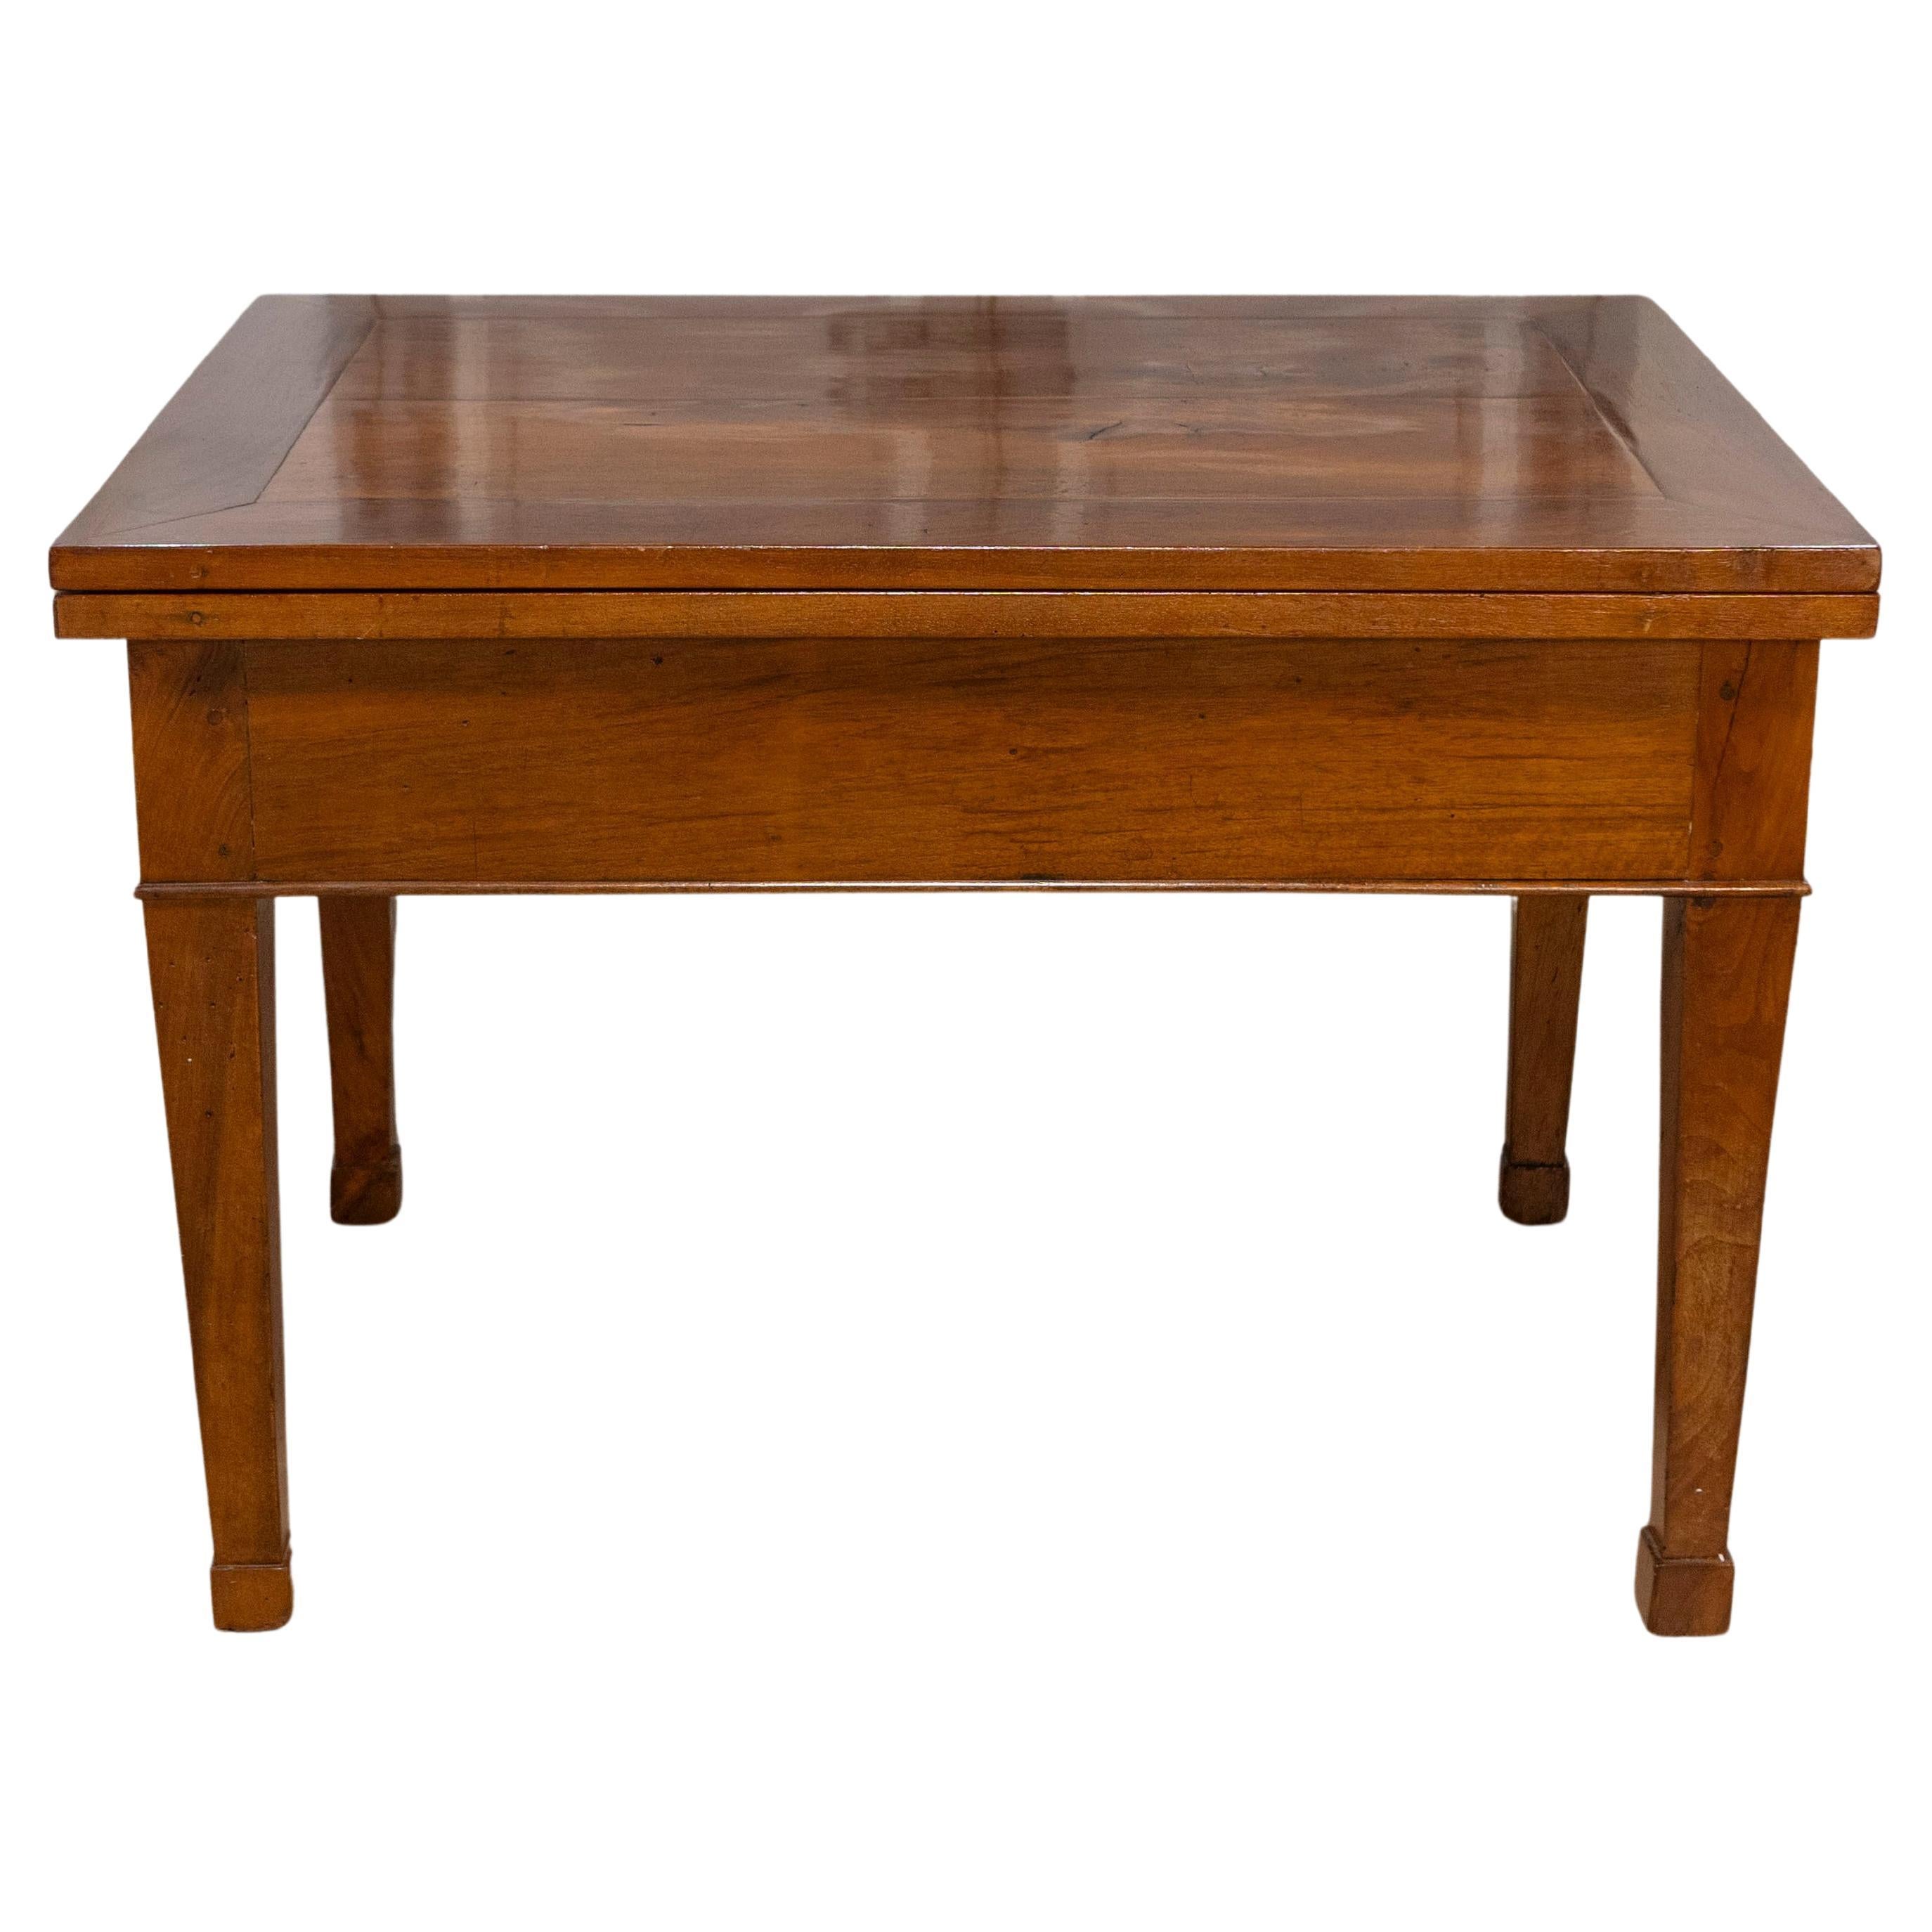 Italian Early 19th Century Walnut Folding Table with Tapered Legs